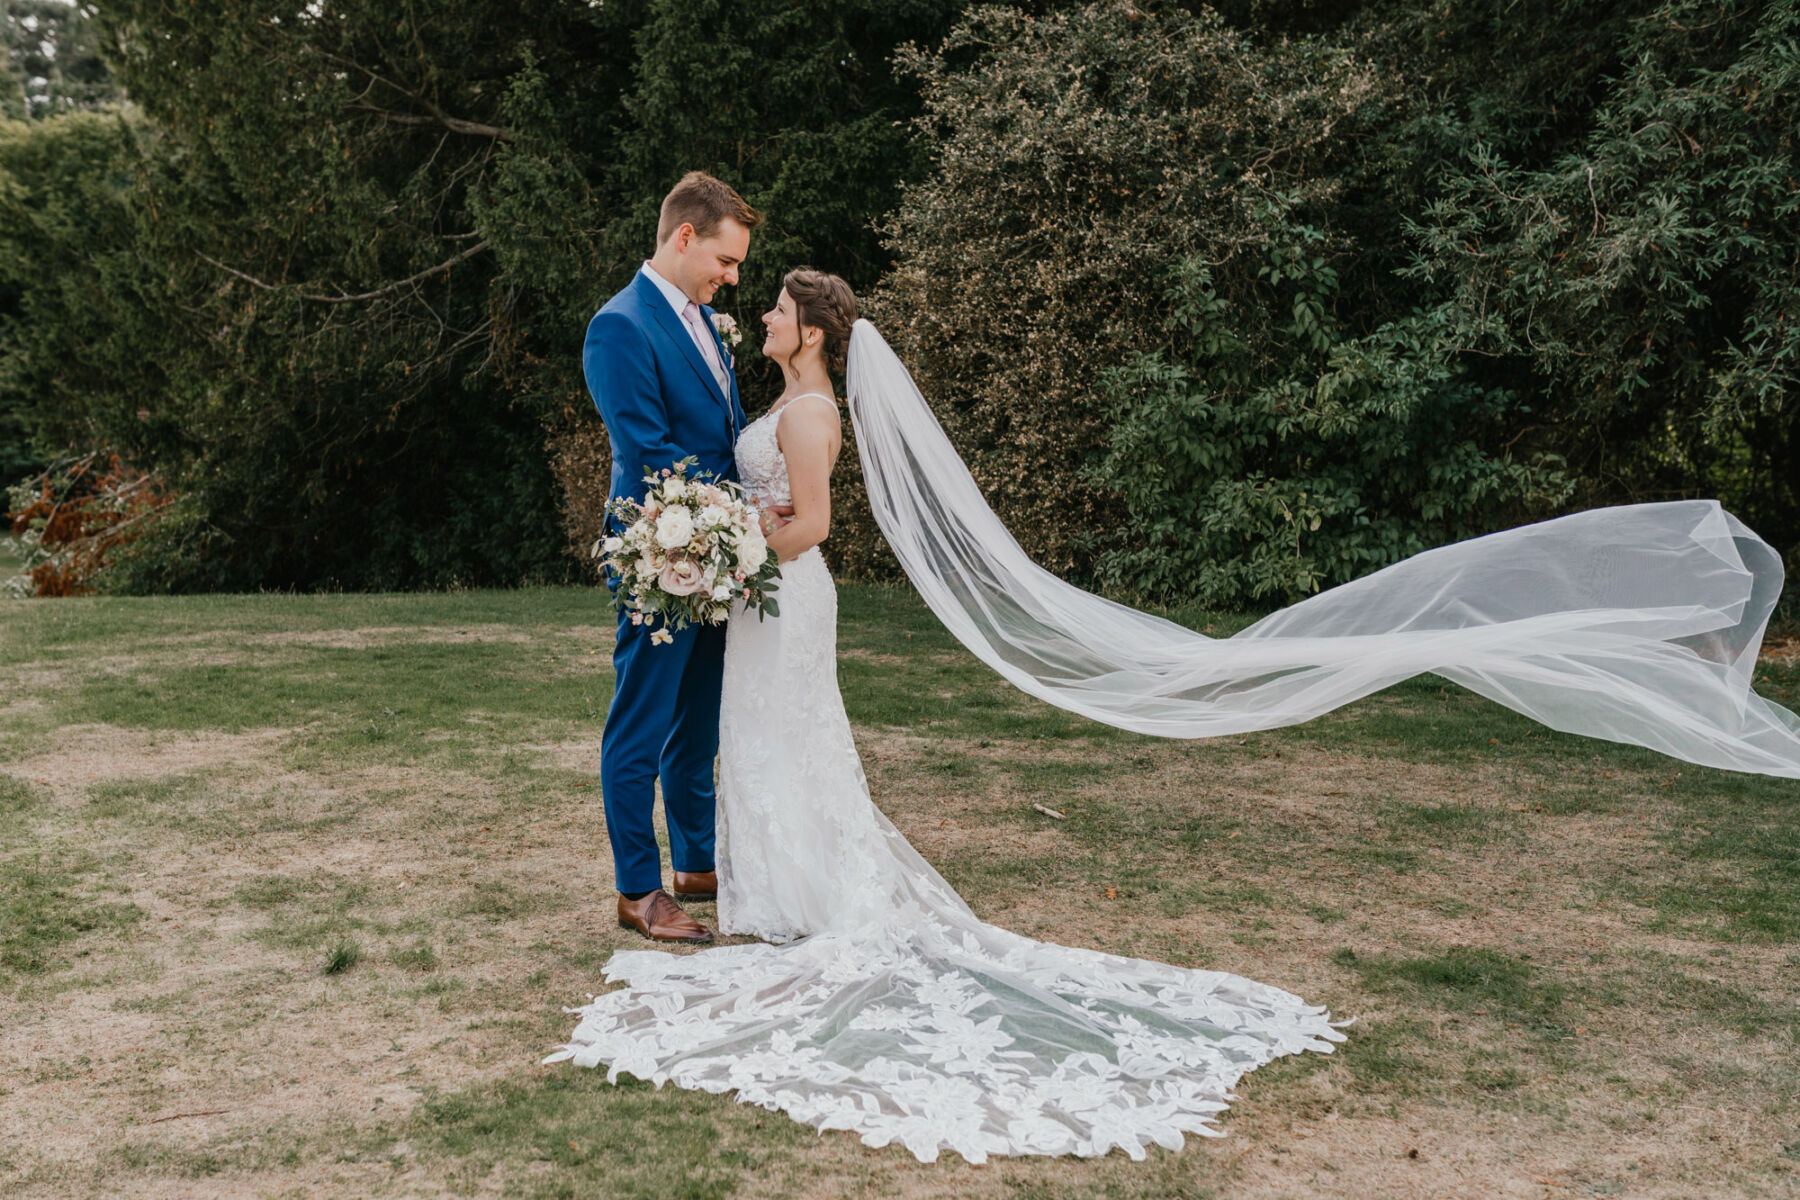 Bride wearing an Essense of Australia wedding dress and long veil flying in the breeze. Nonsuch Mansion wedding, Surrey. Shelby Ellis Photography.